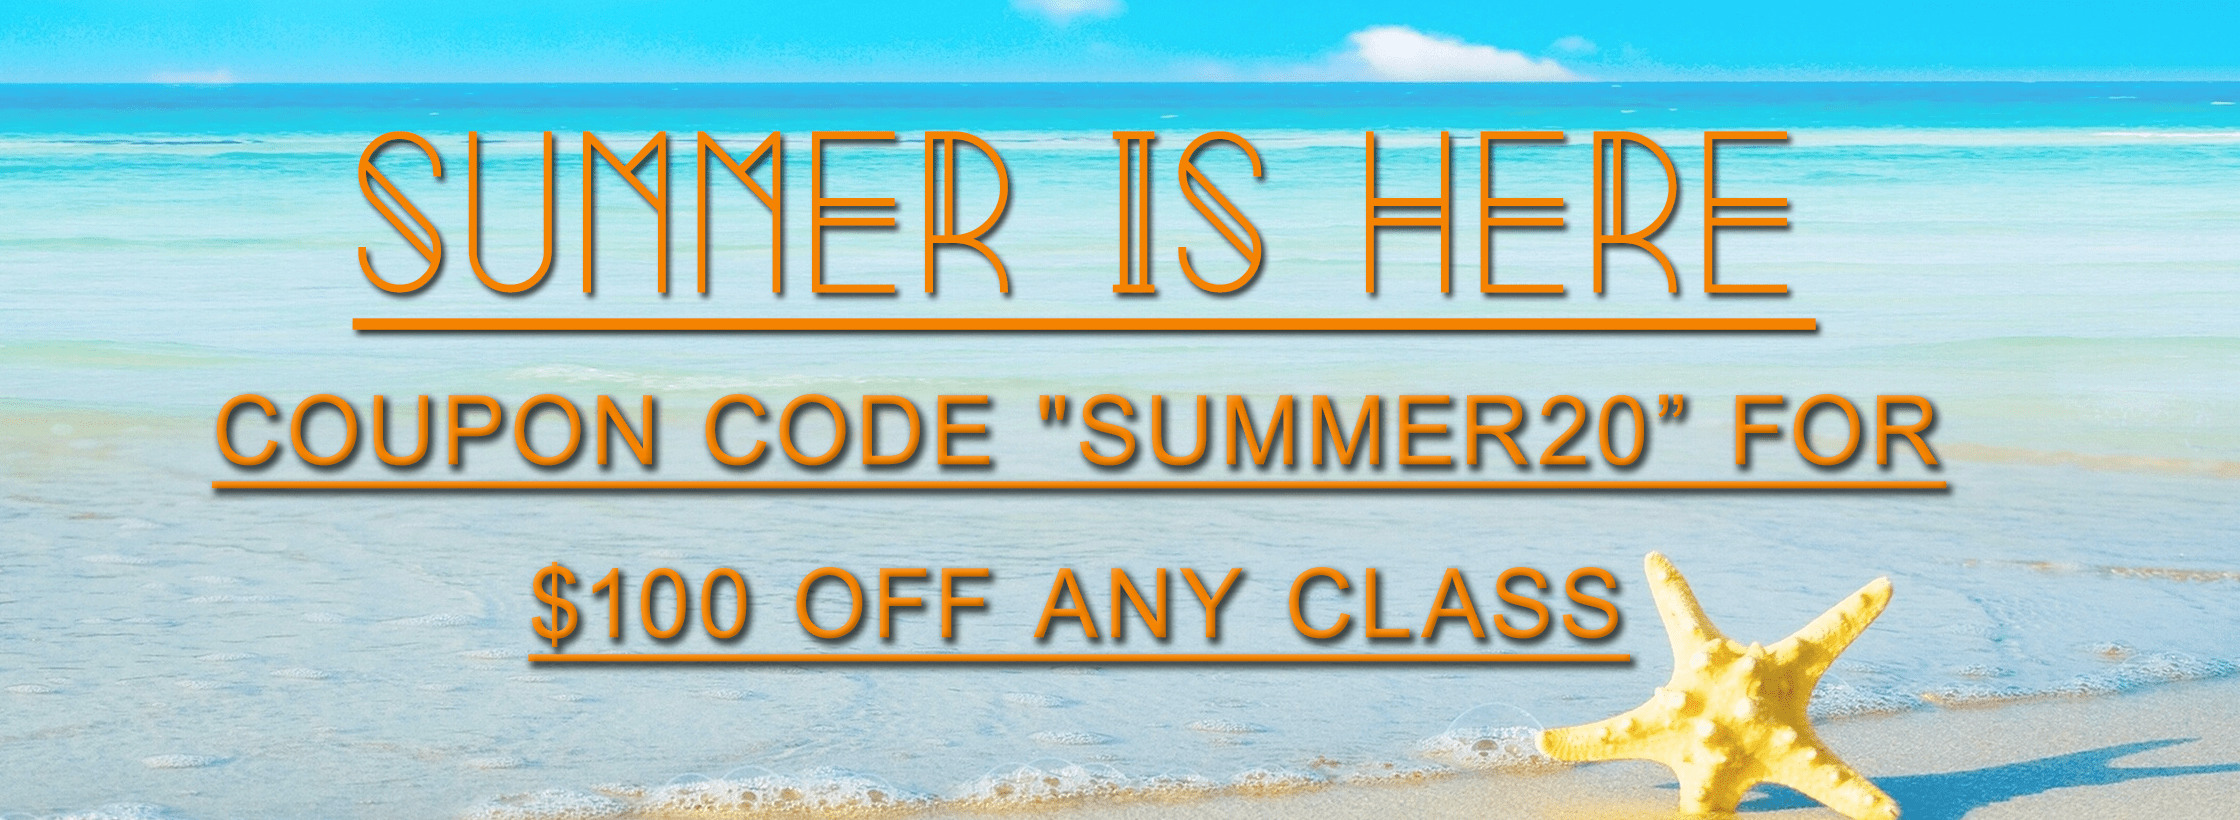 Use Coupon Code "Summer20" for $100 off any class